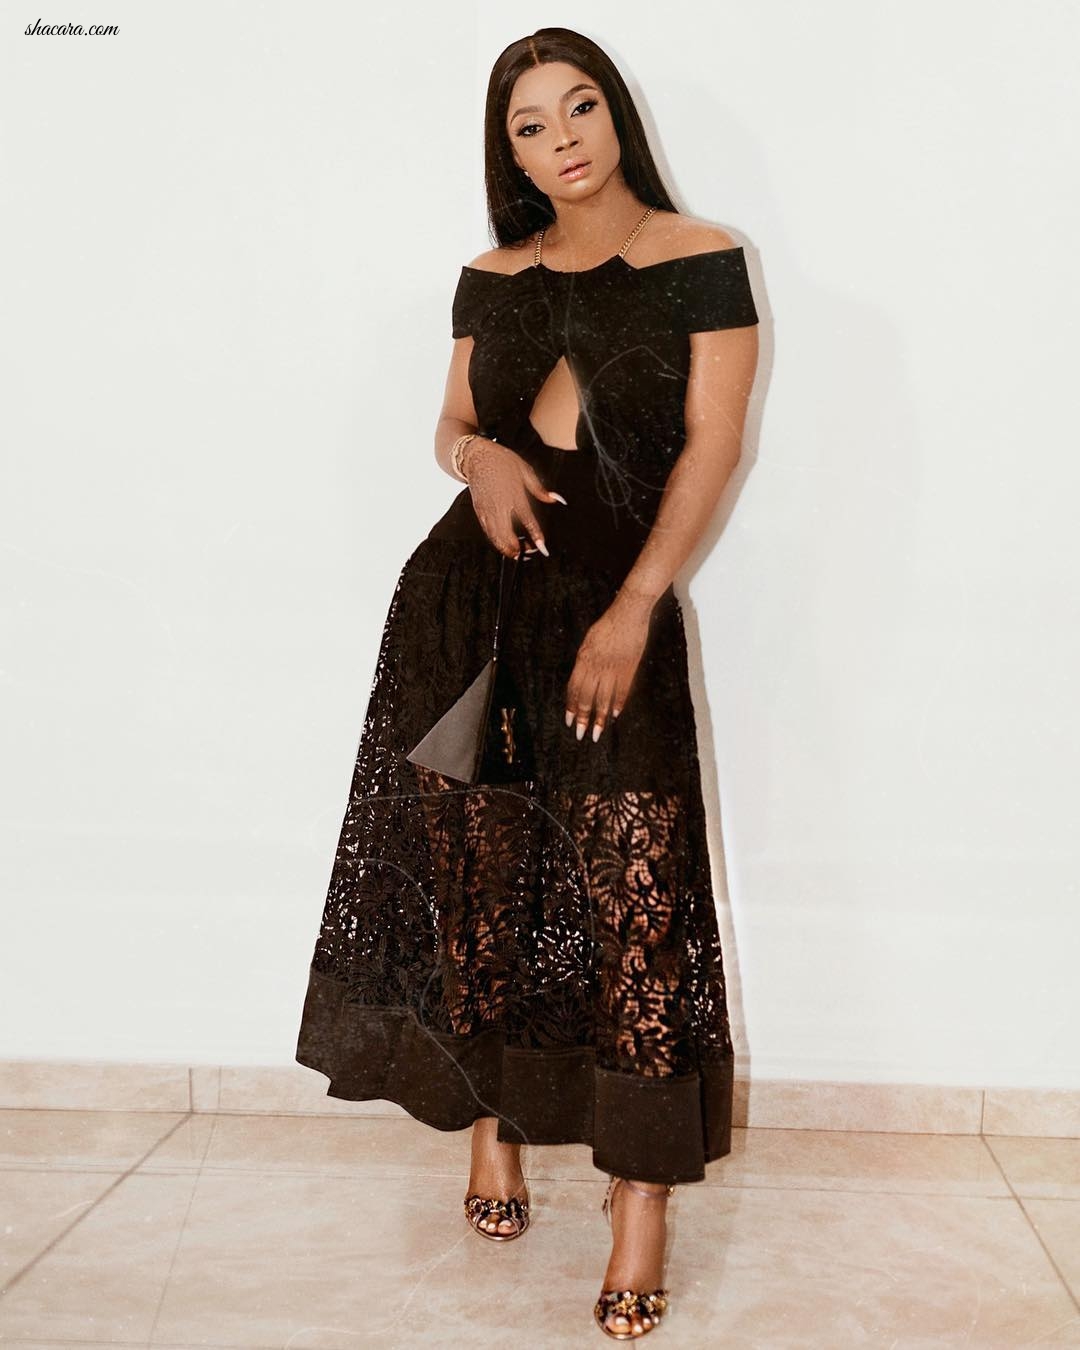 Toke Makinwa Just Updated Instagram With The Chicest Self Portrait Ensemble